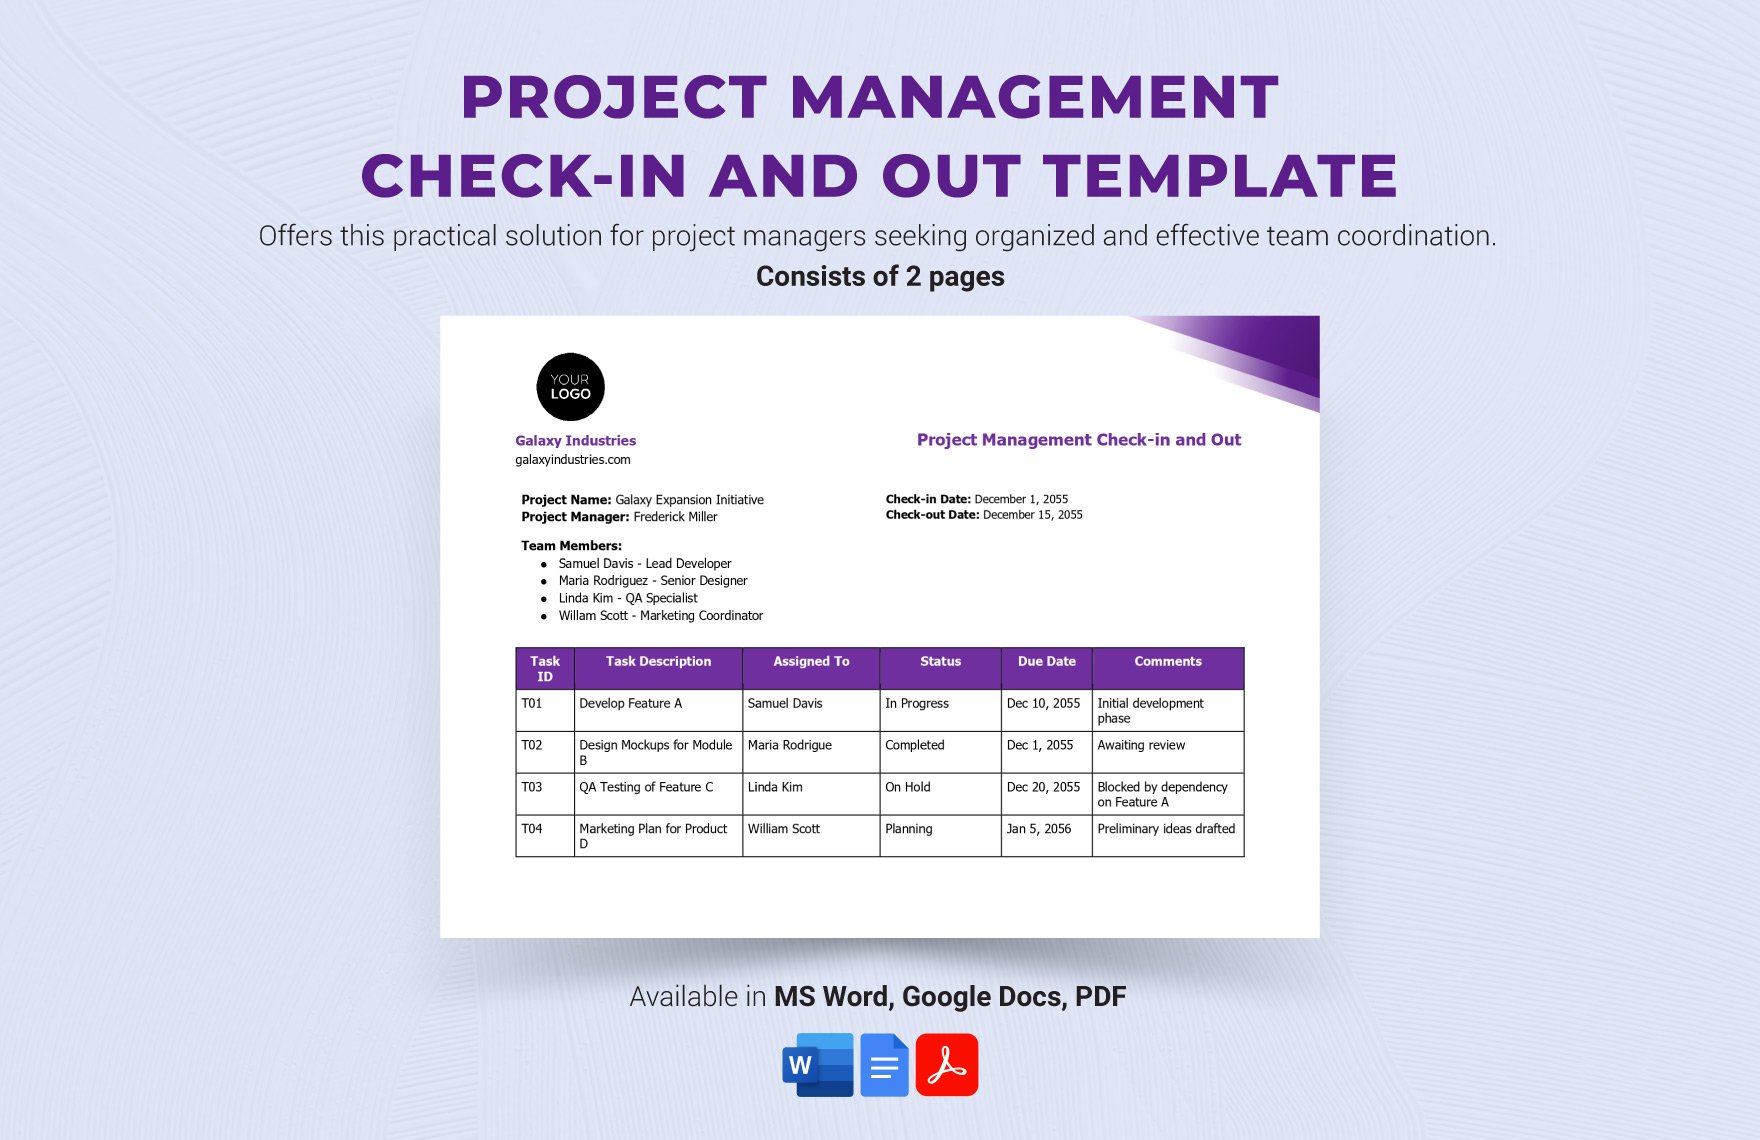 Free Project Management Check-in and Out Template in Word, Google Docs, PDF